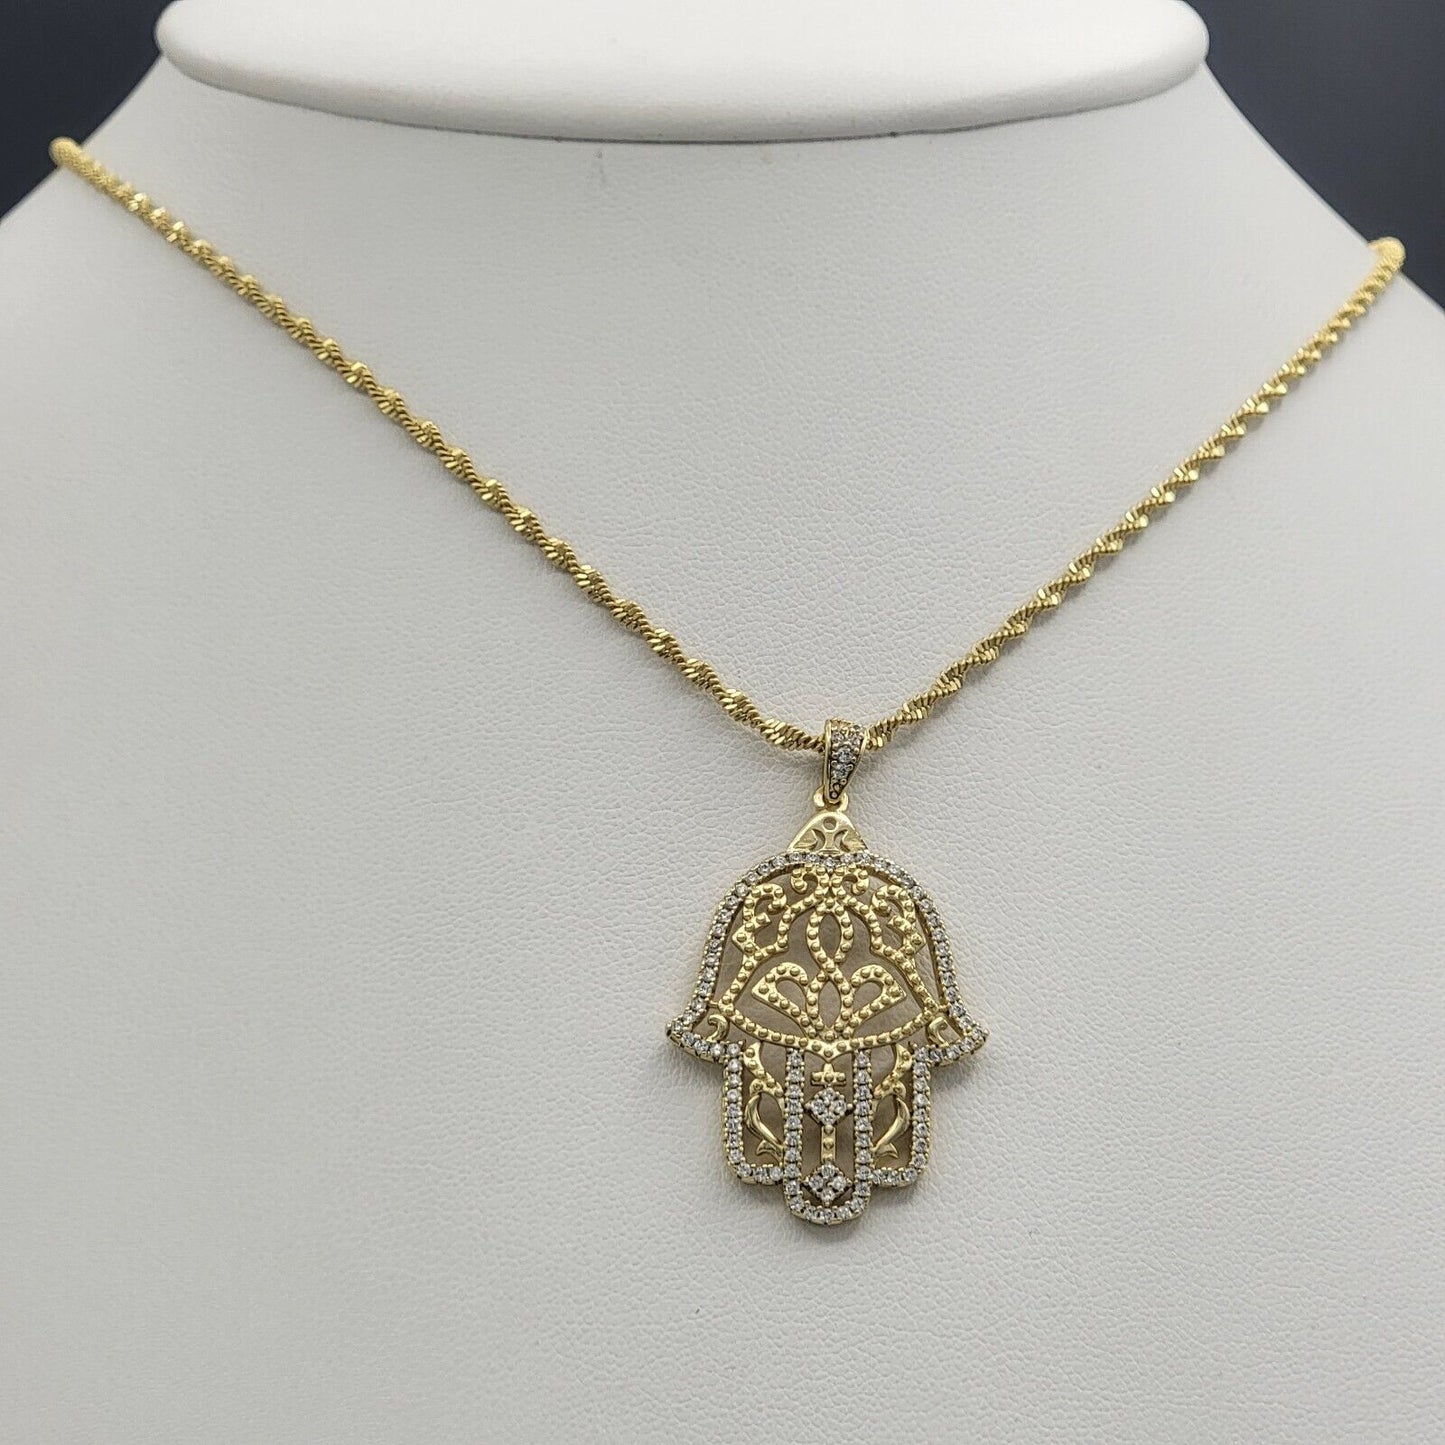 Necklaces - 14K Gold Plated. Hamsa Hand Pendant & Chain.